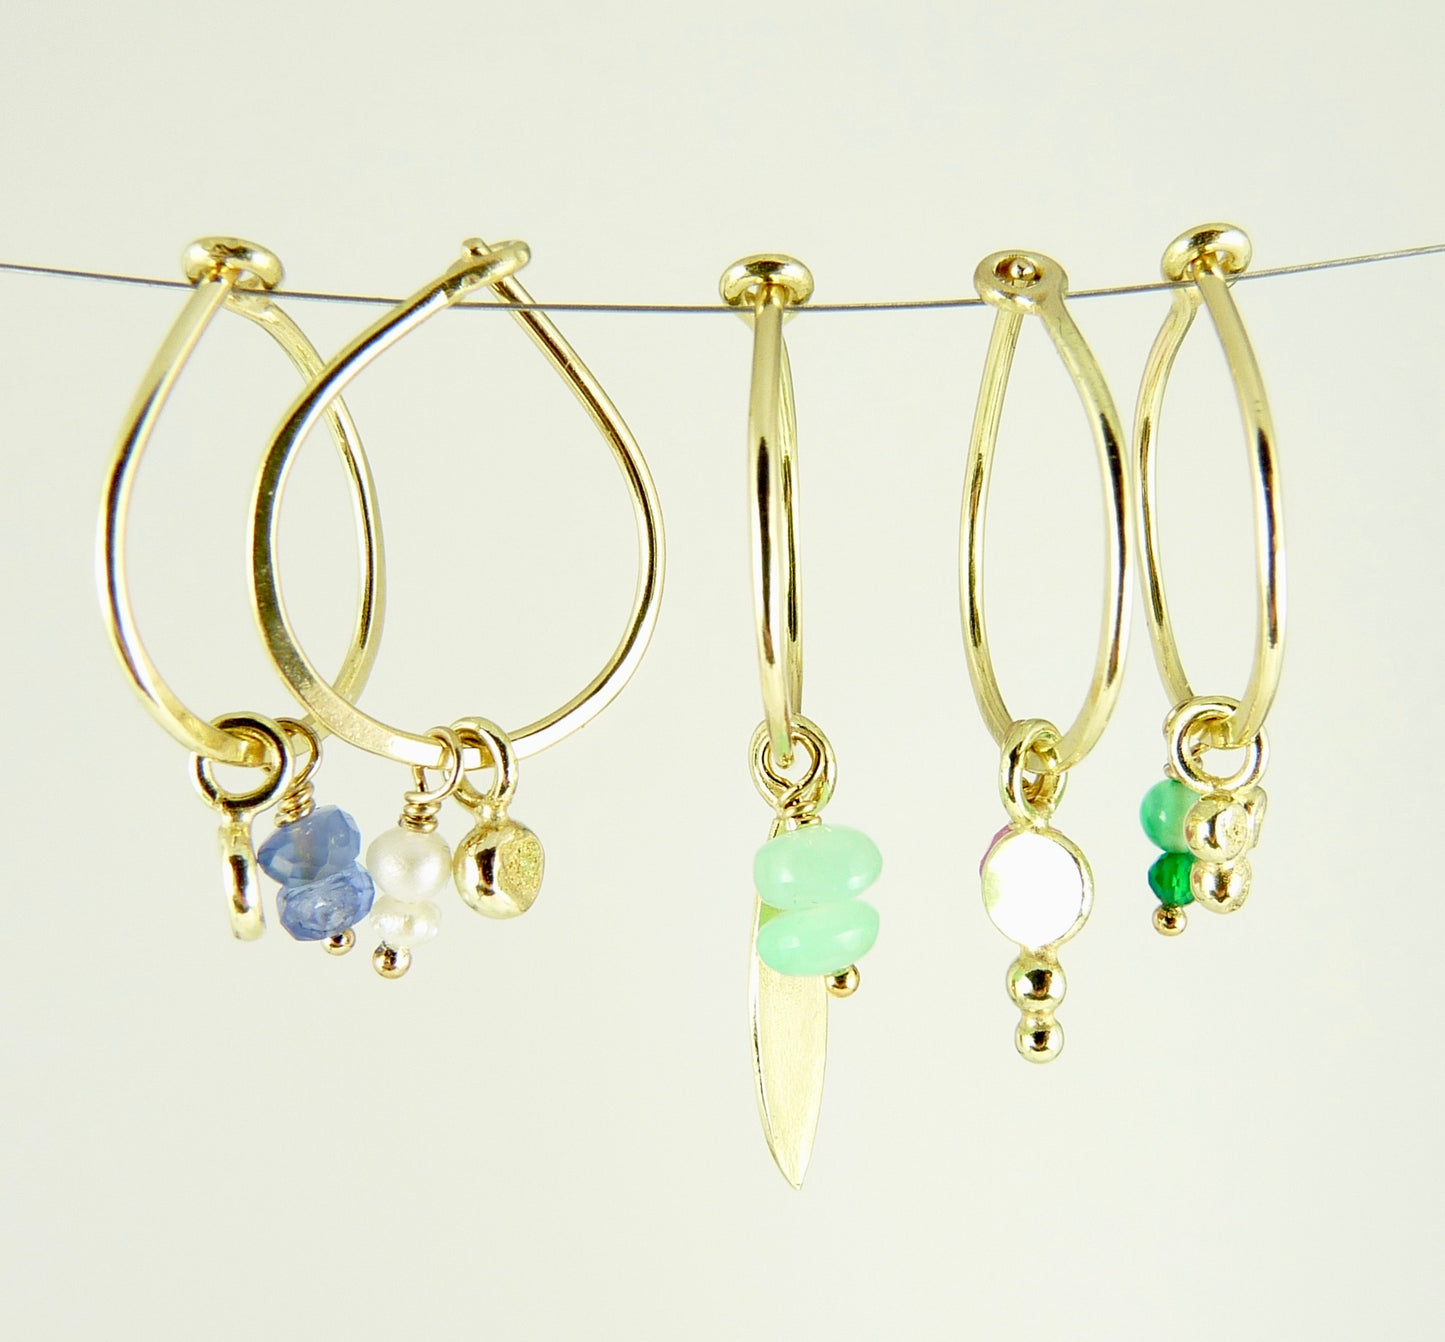 18ct Gold hoop earring with assorted charms and gemstone bead